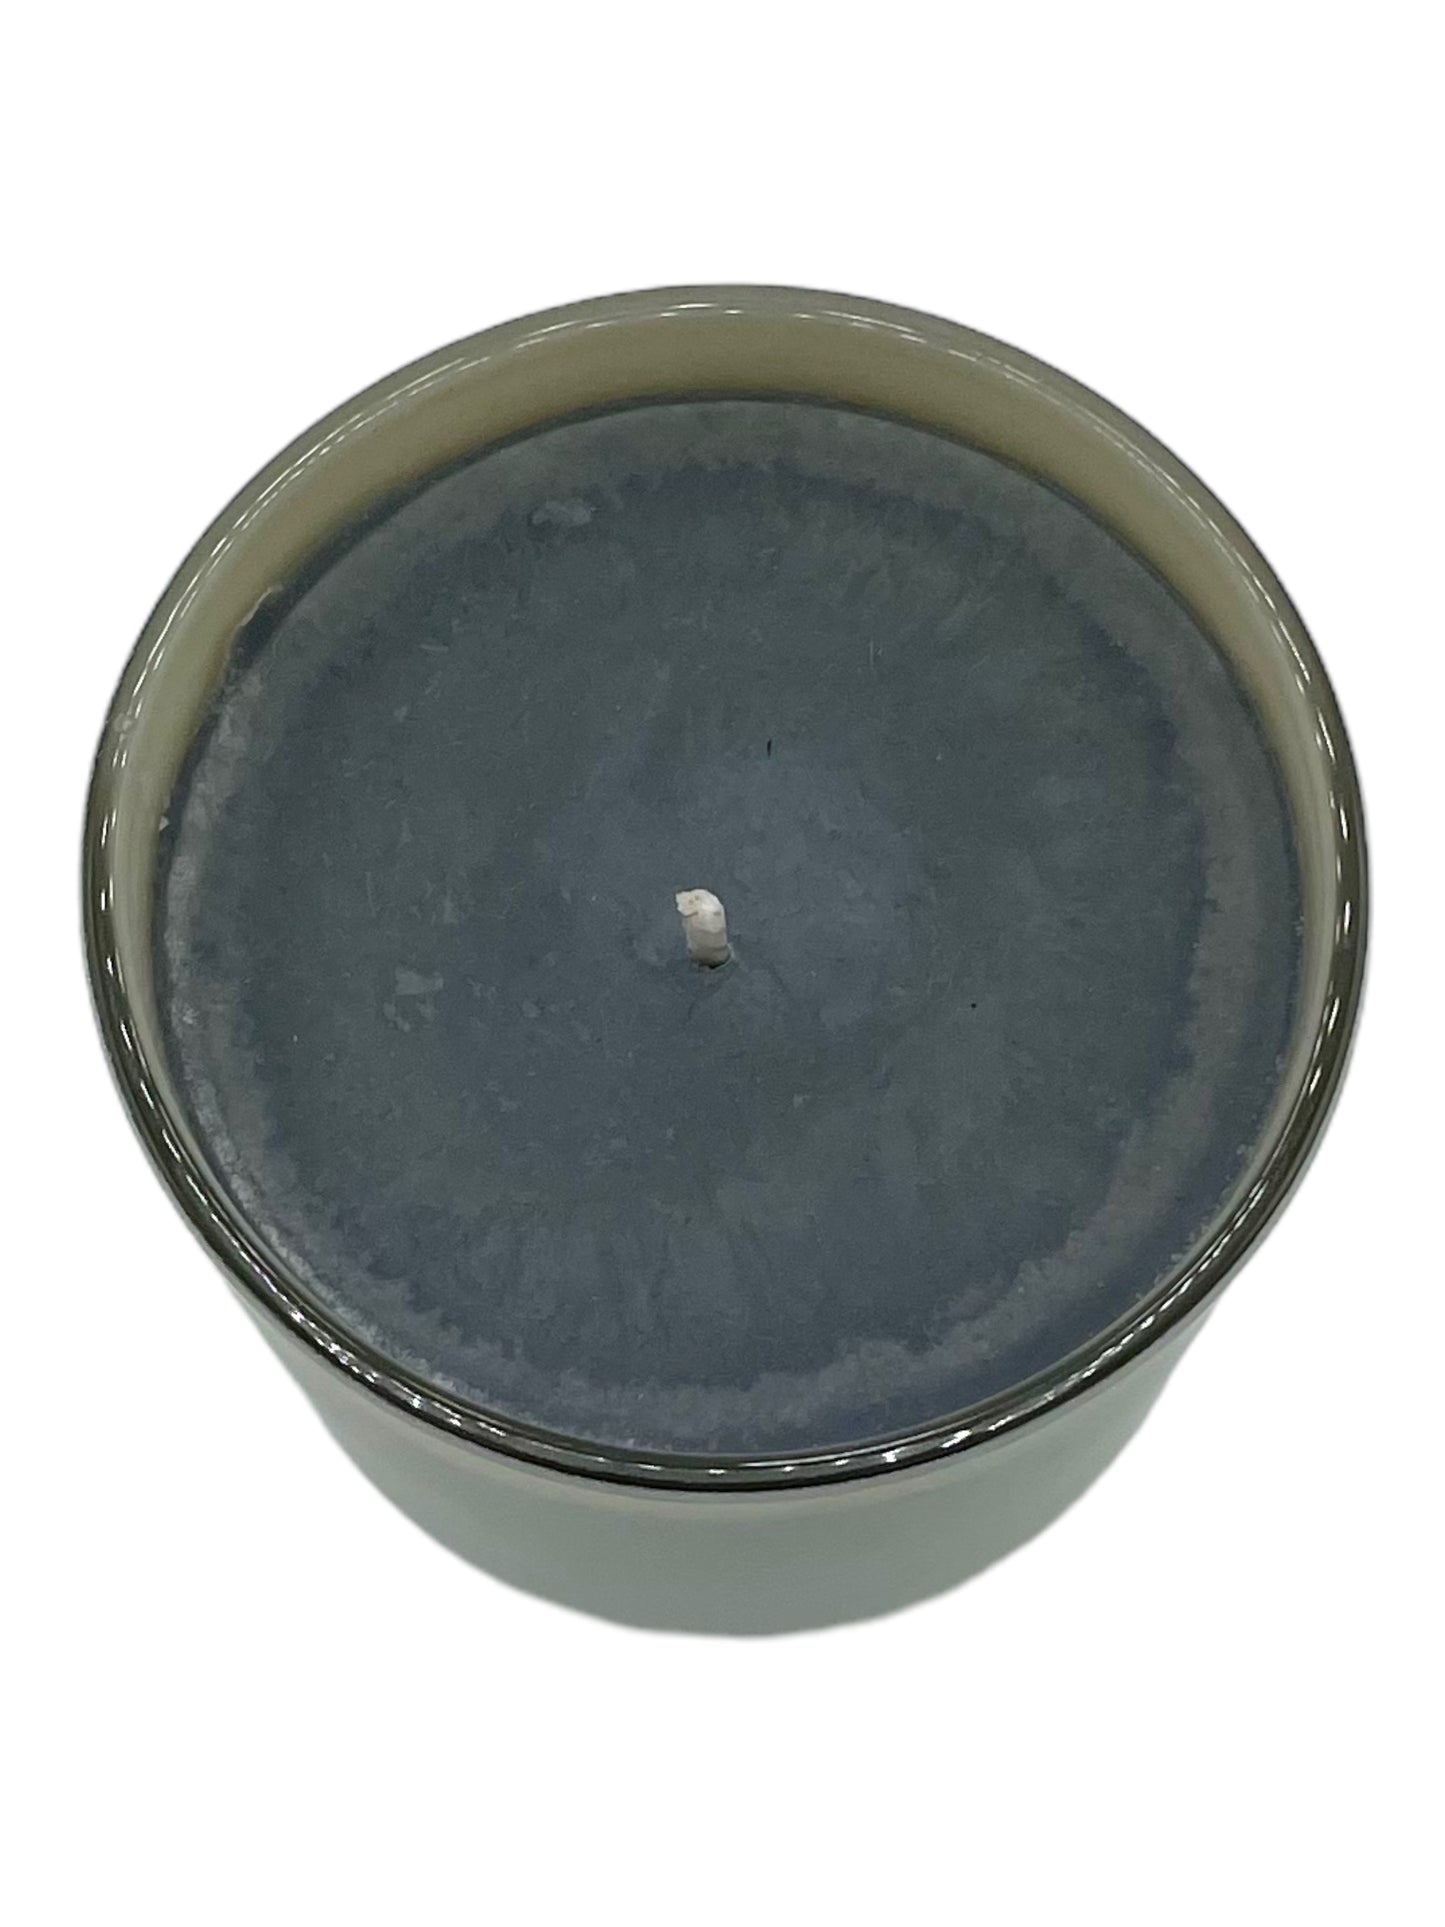 Genuine Design Soy Wax Candle - Tobacco & Leather - 10oz